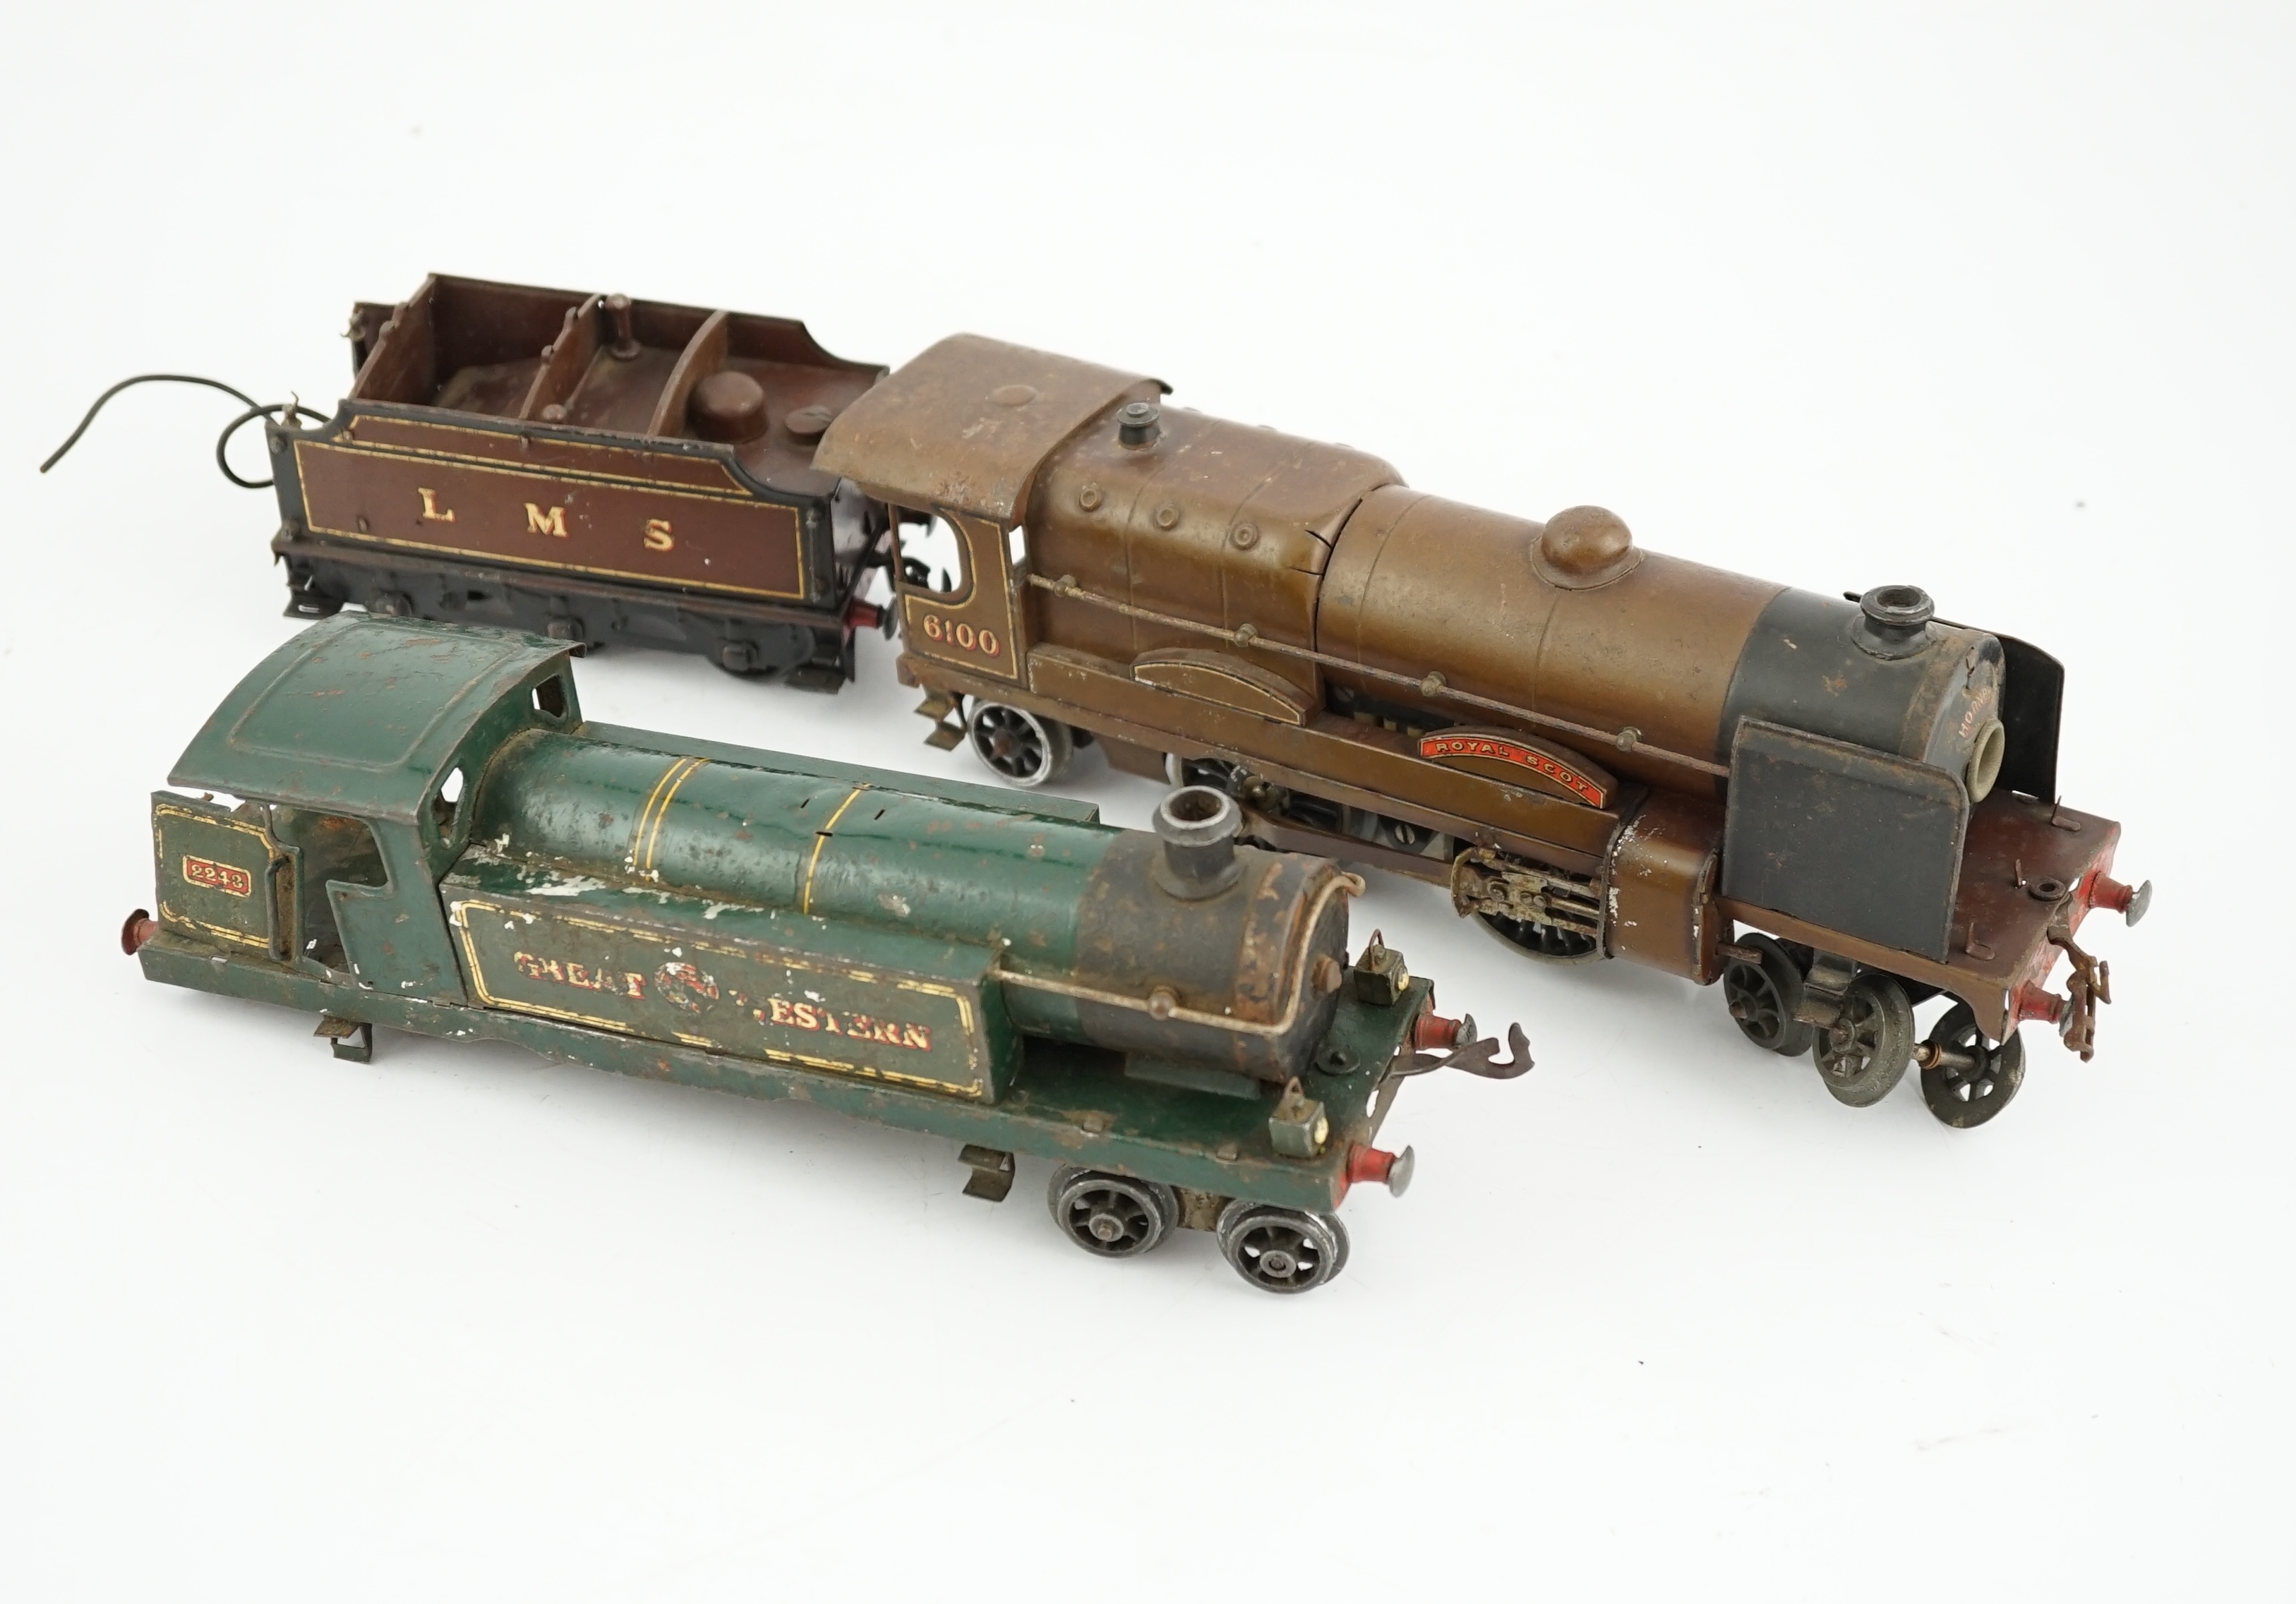 Two Hornby Series 0 gauge tinplate locomotives for 3-rail running; an LMS 4-4-2, Royal Scot 6100,